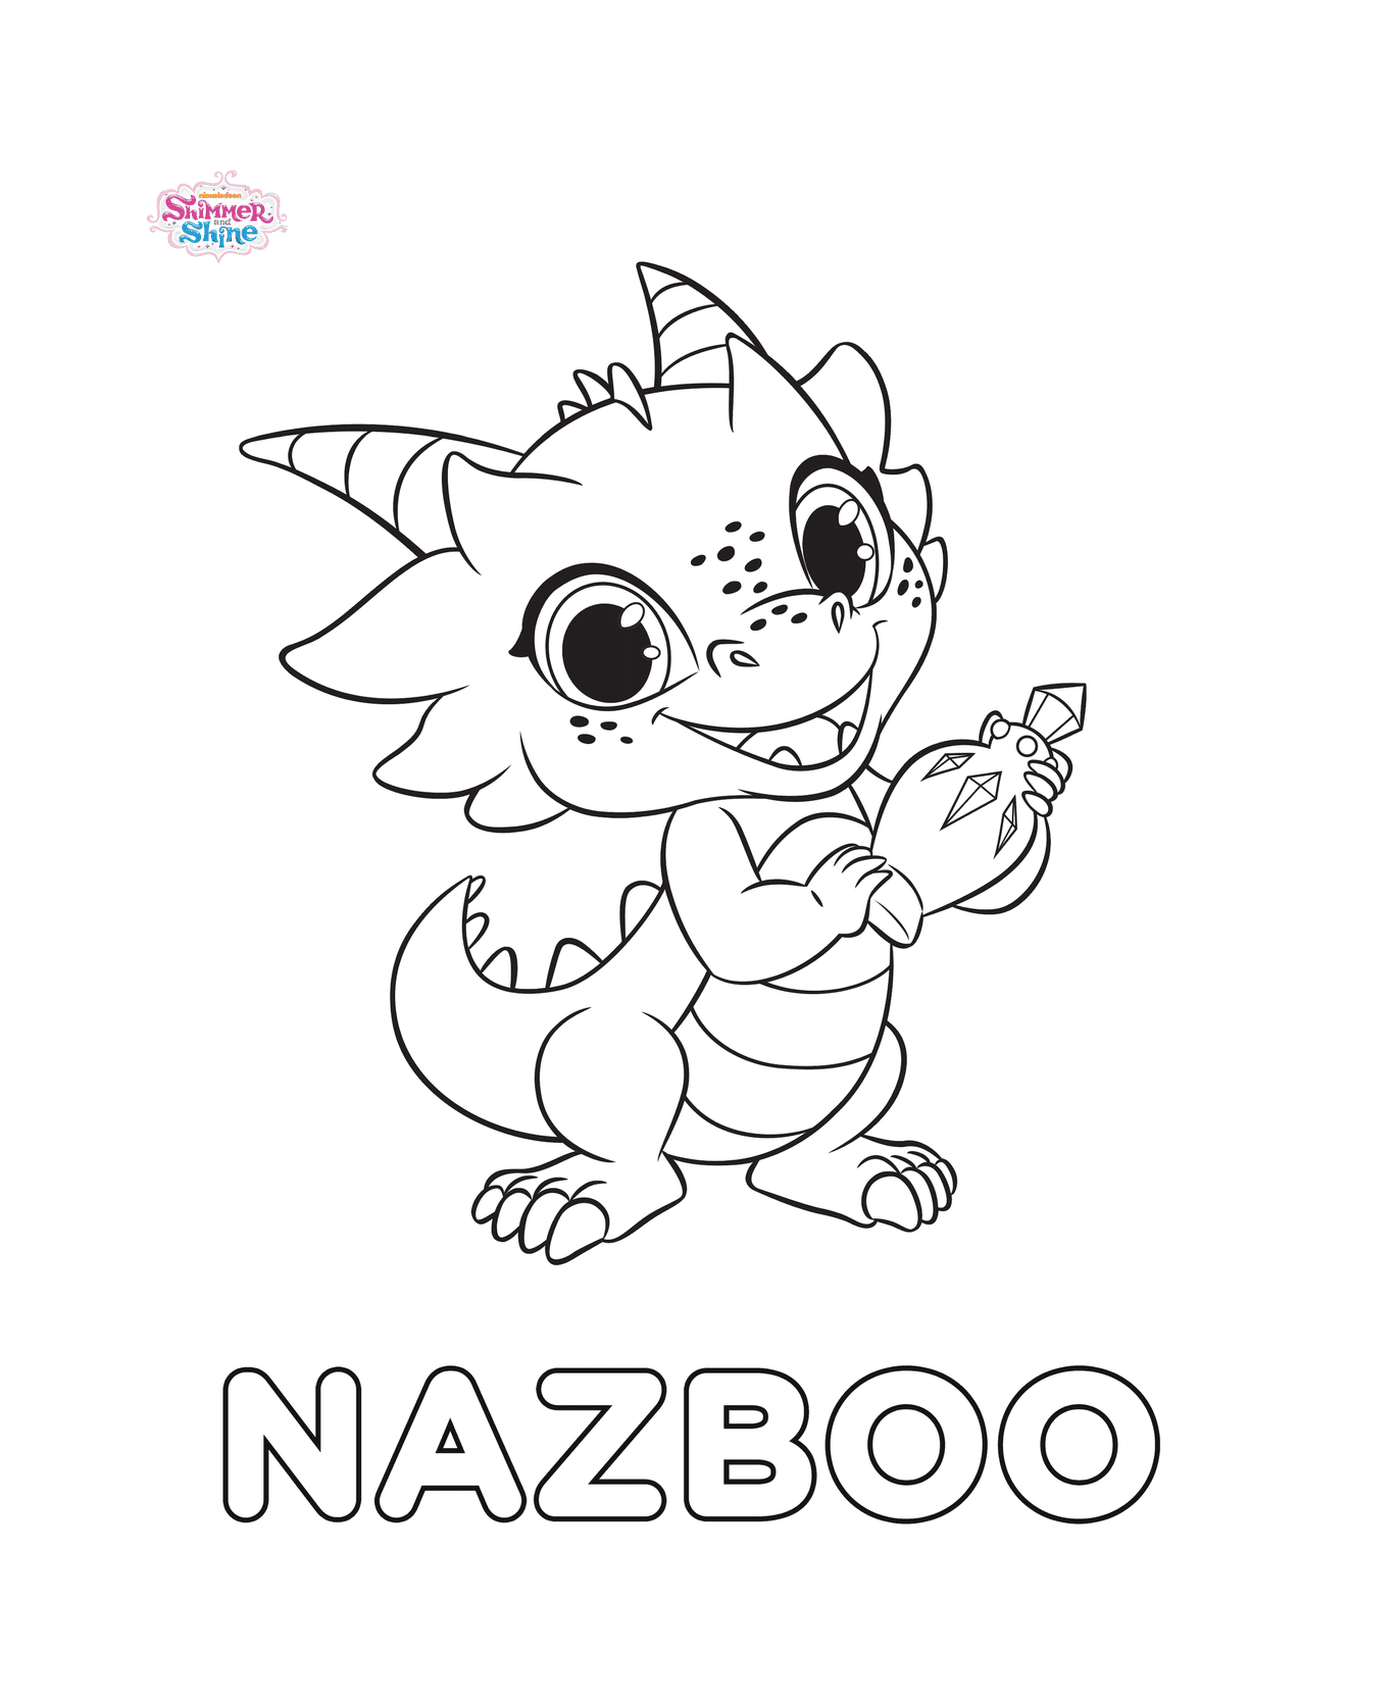 coloriage shimmer et shine Nazboo